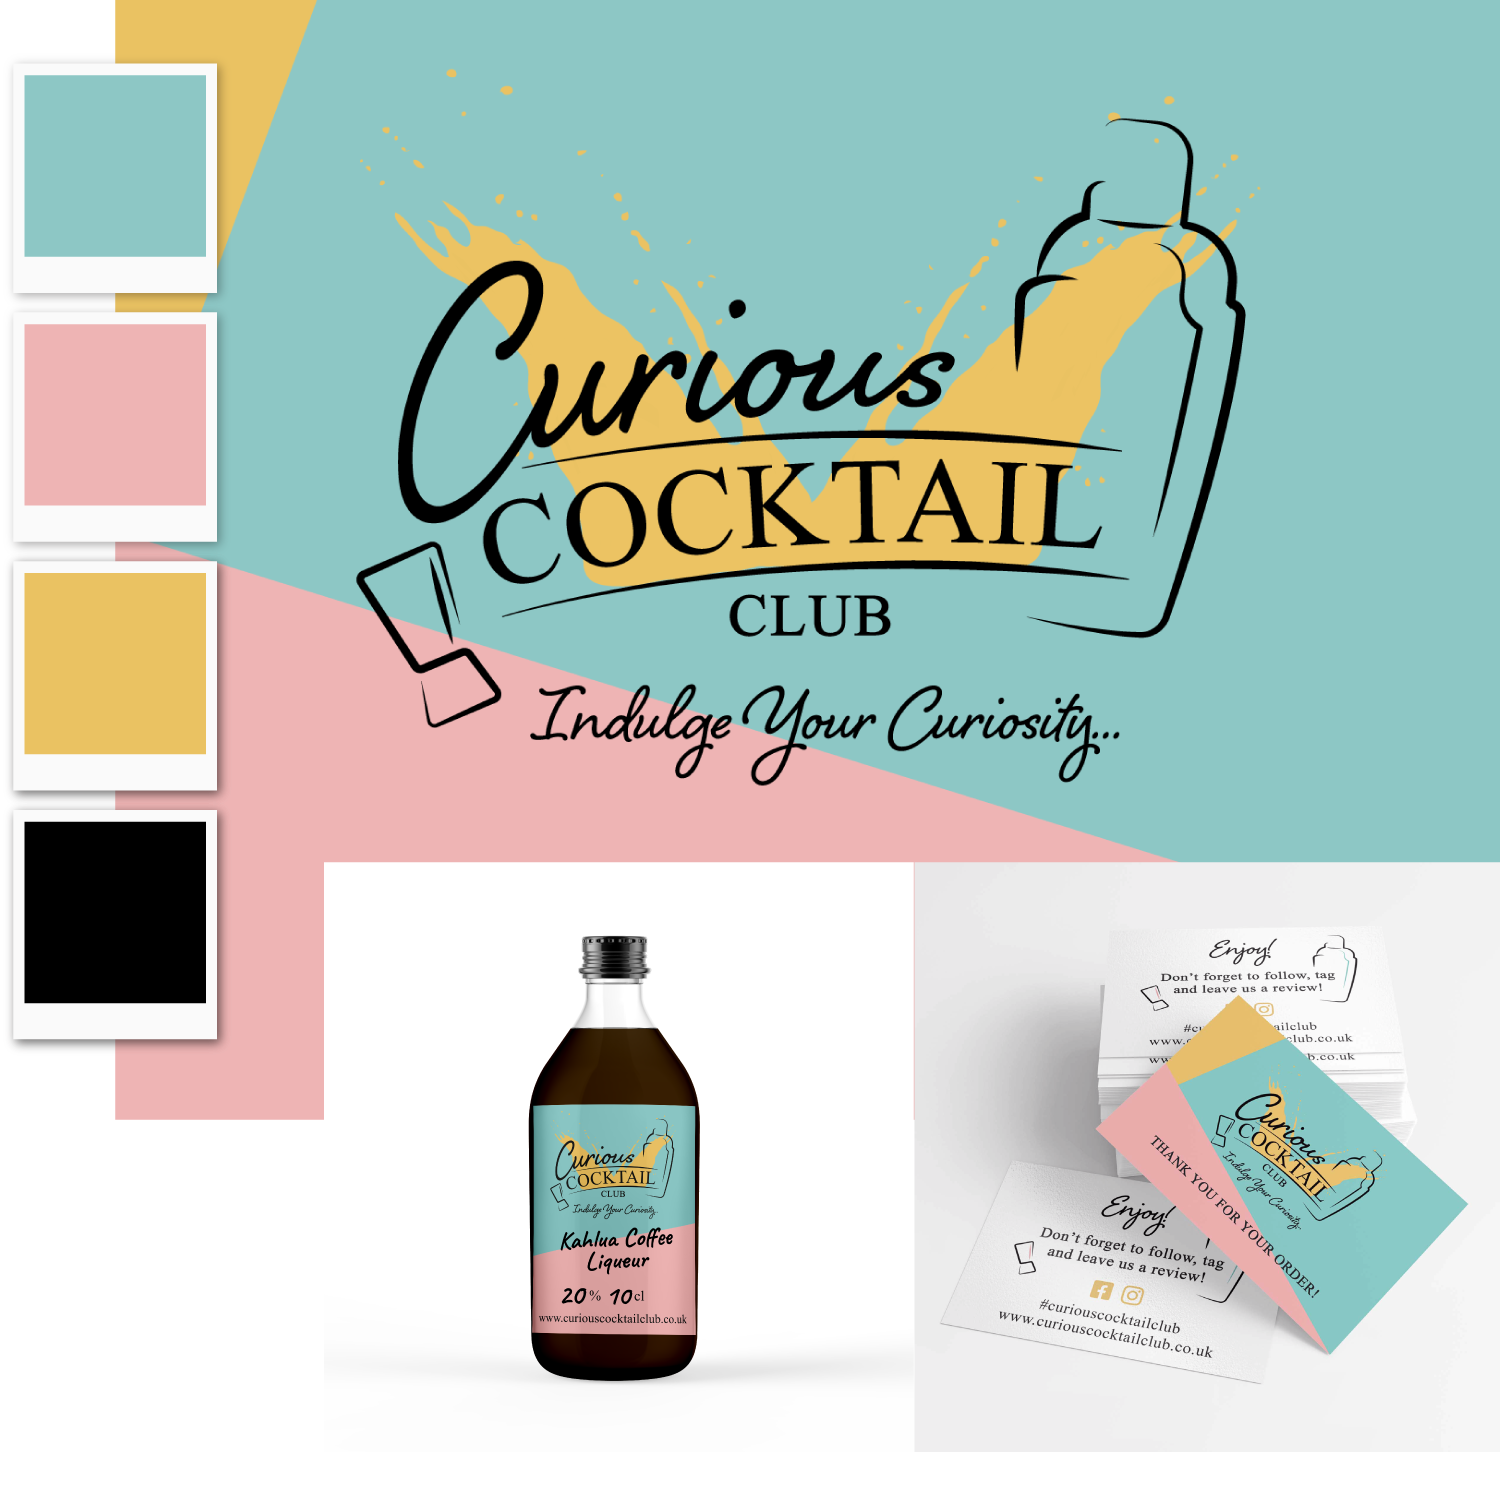 Curious Cocktail Club Grantham colourful logo and branding design